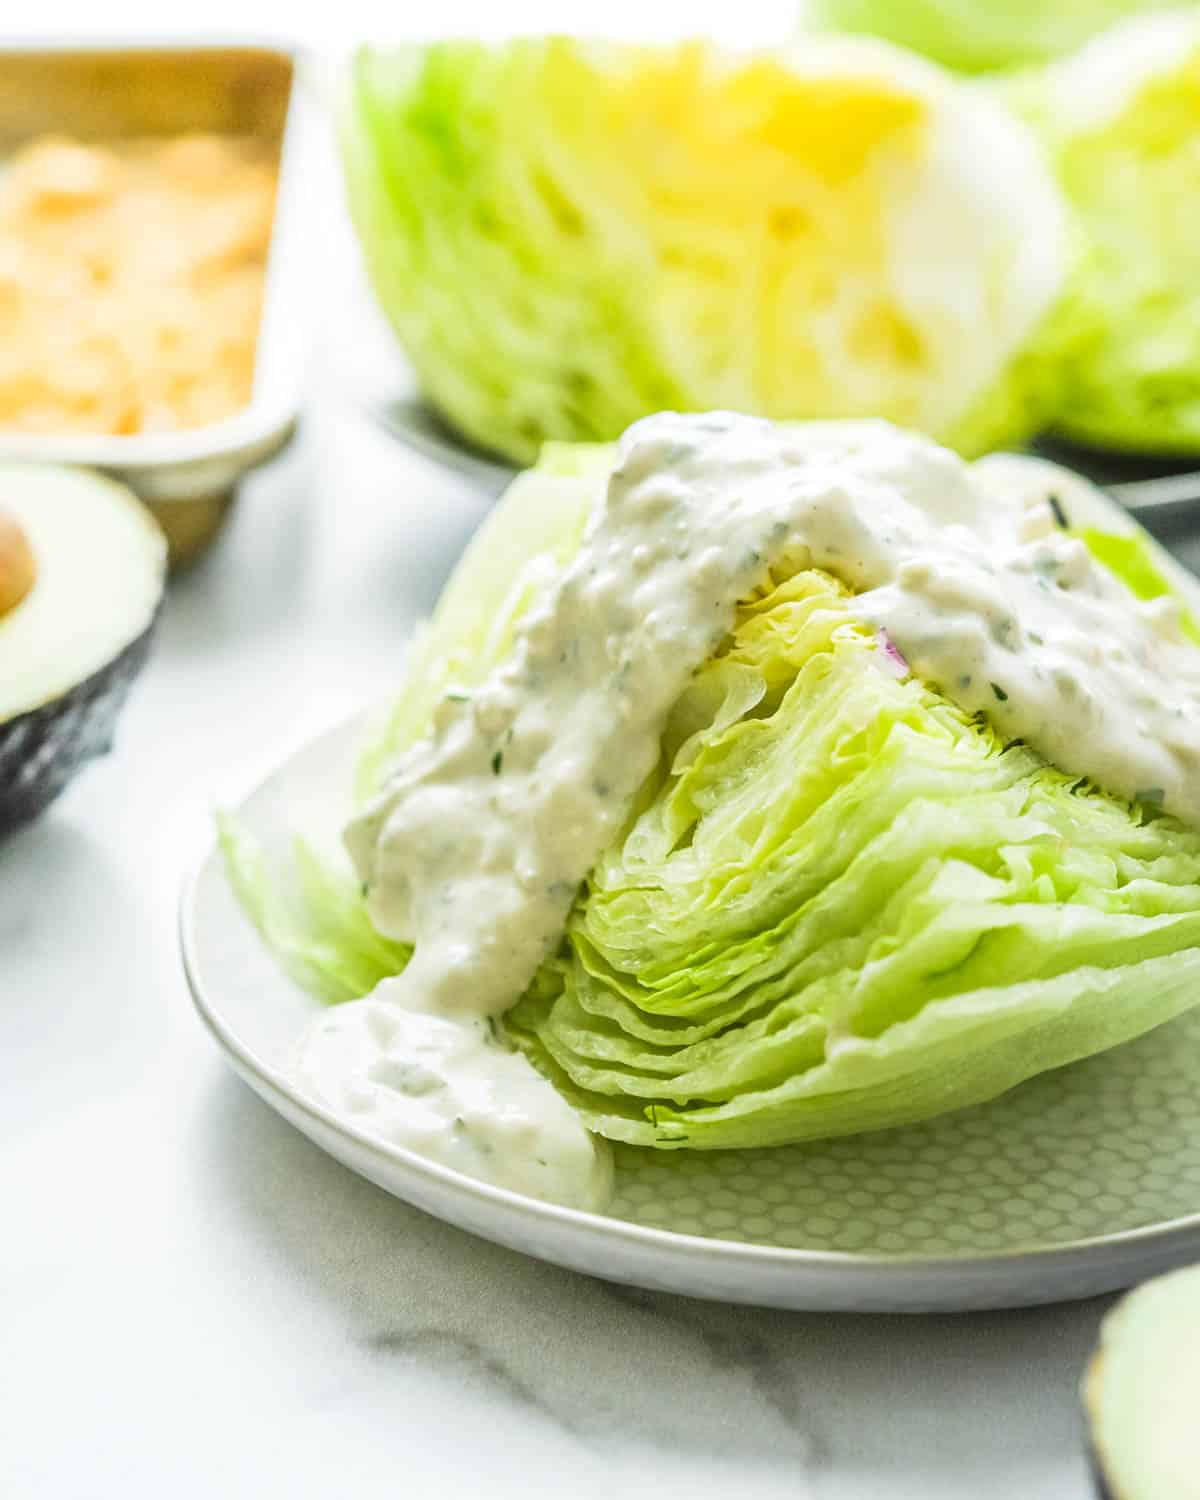 Adding a ladle of blue cheese dressing to a wedge of iceberg lettuce.